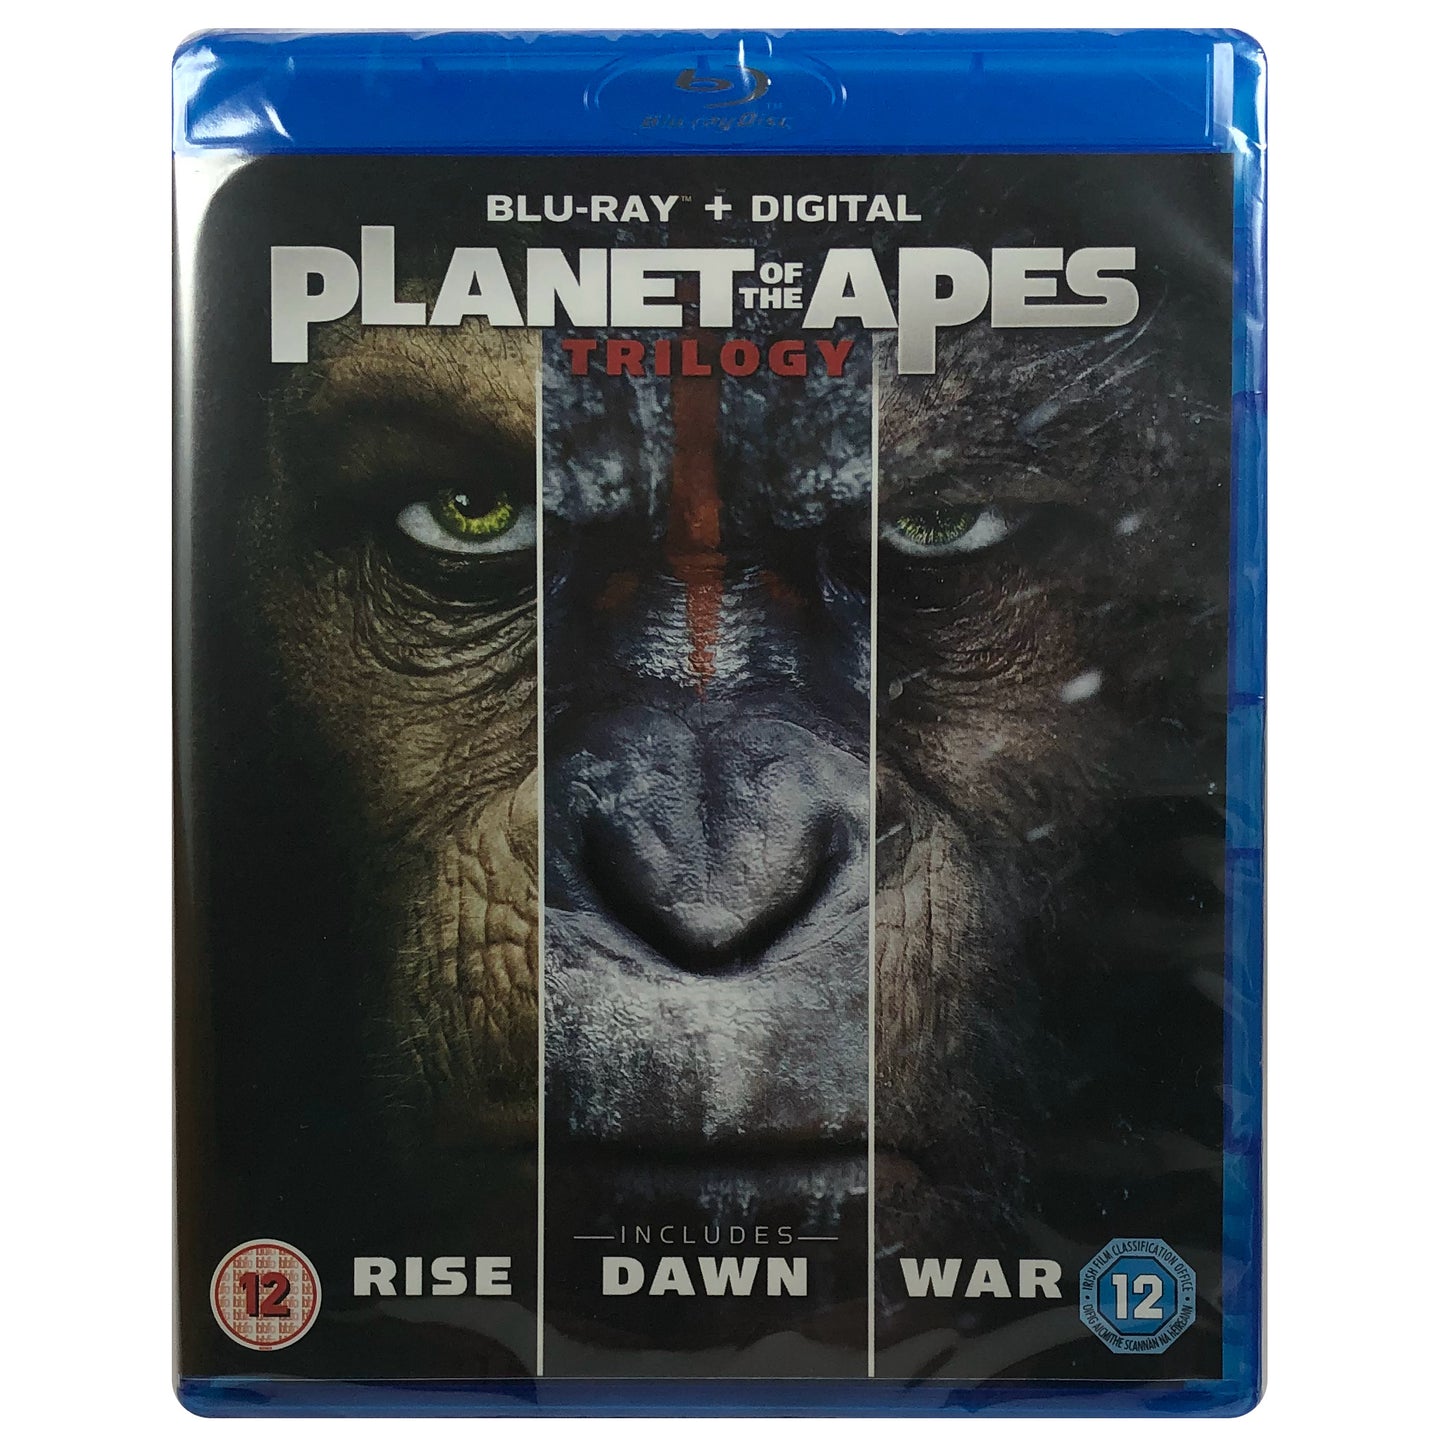 Planet of the Apes Trilogy Blu-Ray Box Set